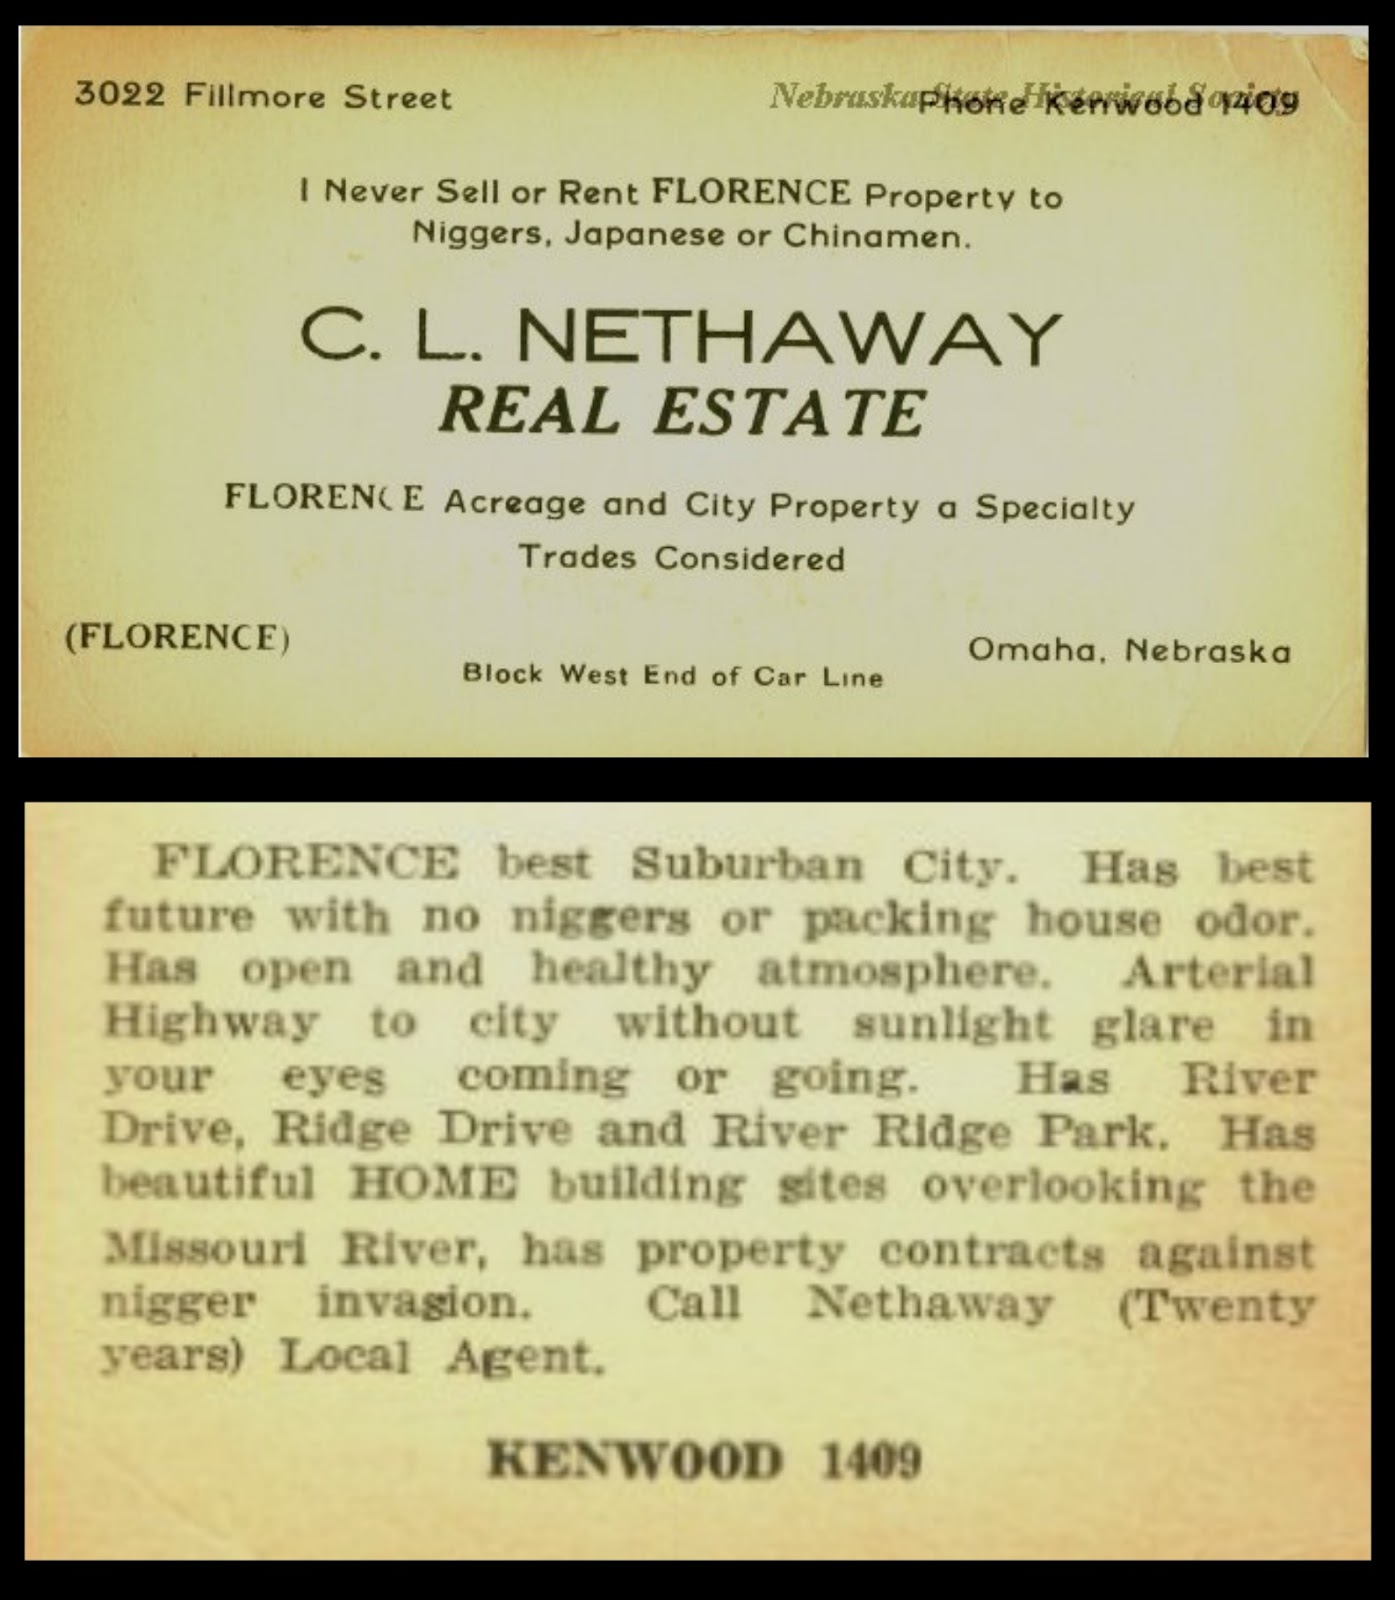 C. L. Nethaway was an adamant white supremacist real estate agent in the Florence neighborhood of North Omaha, Nebraska. This is his 1920s-era business card.